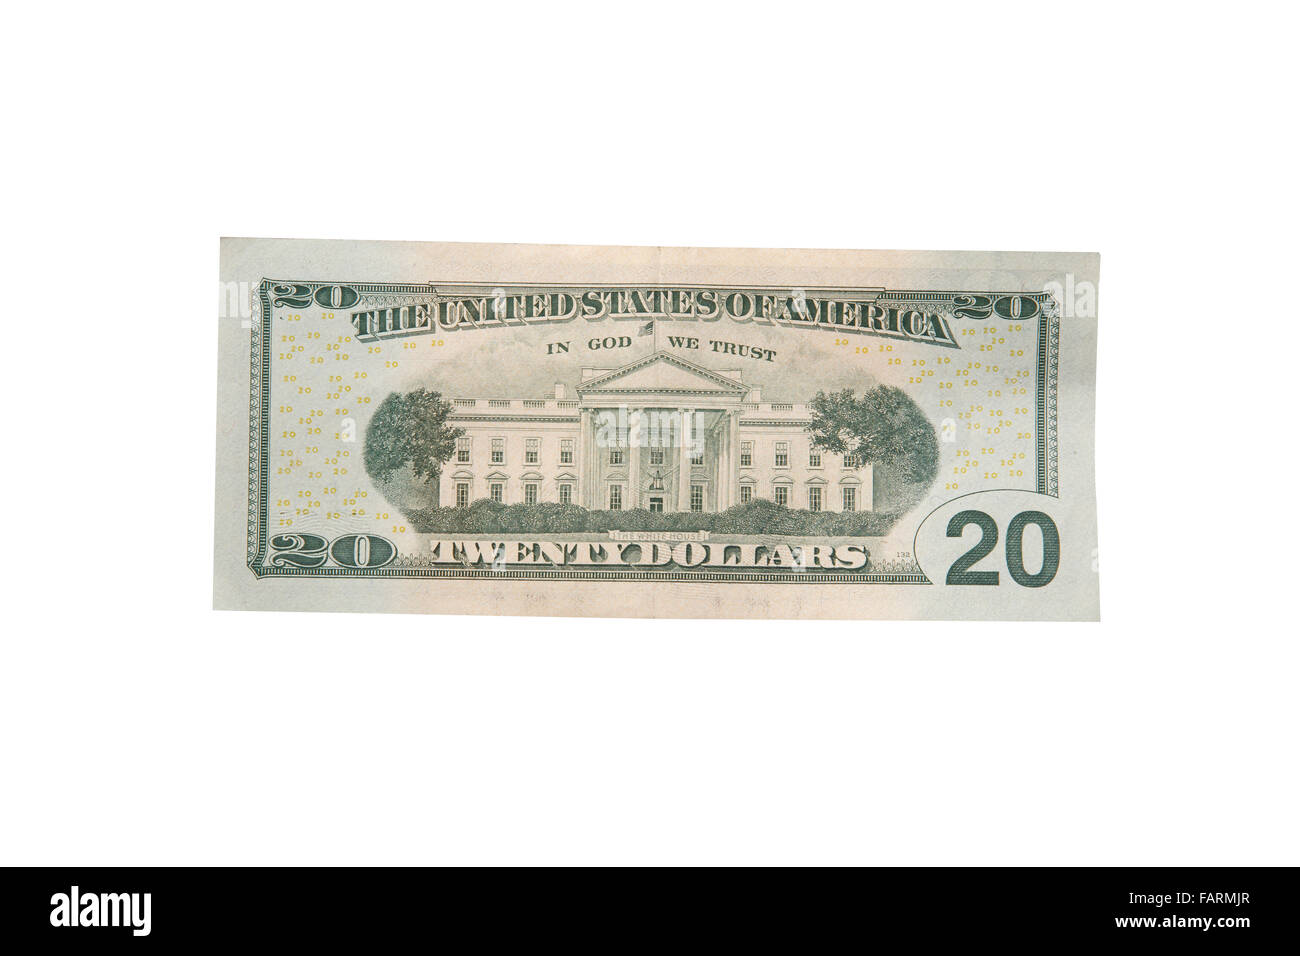 stock image of the us bank note Stock Photo